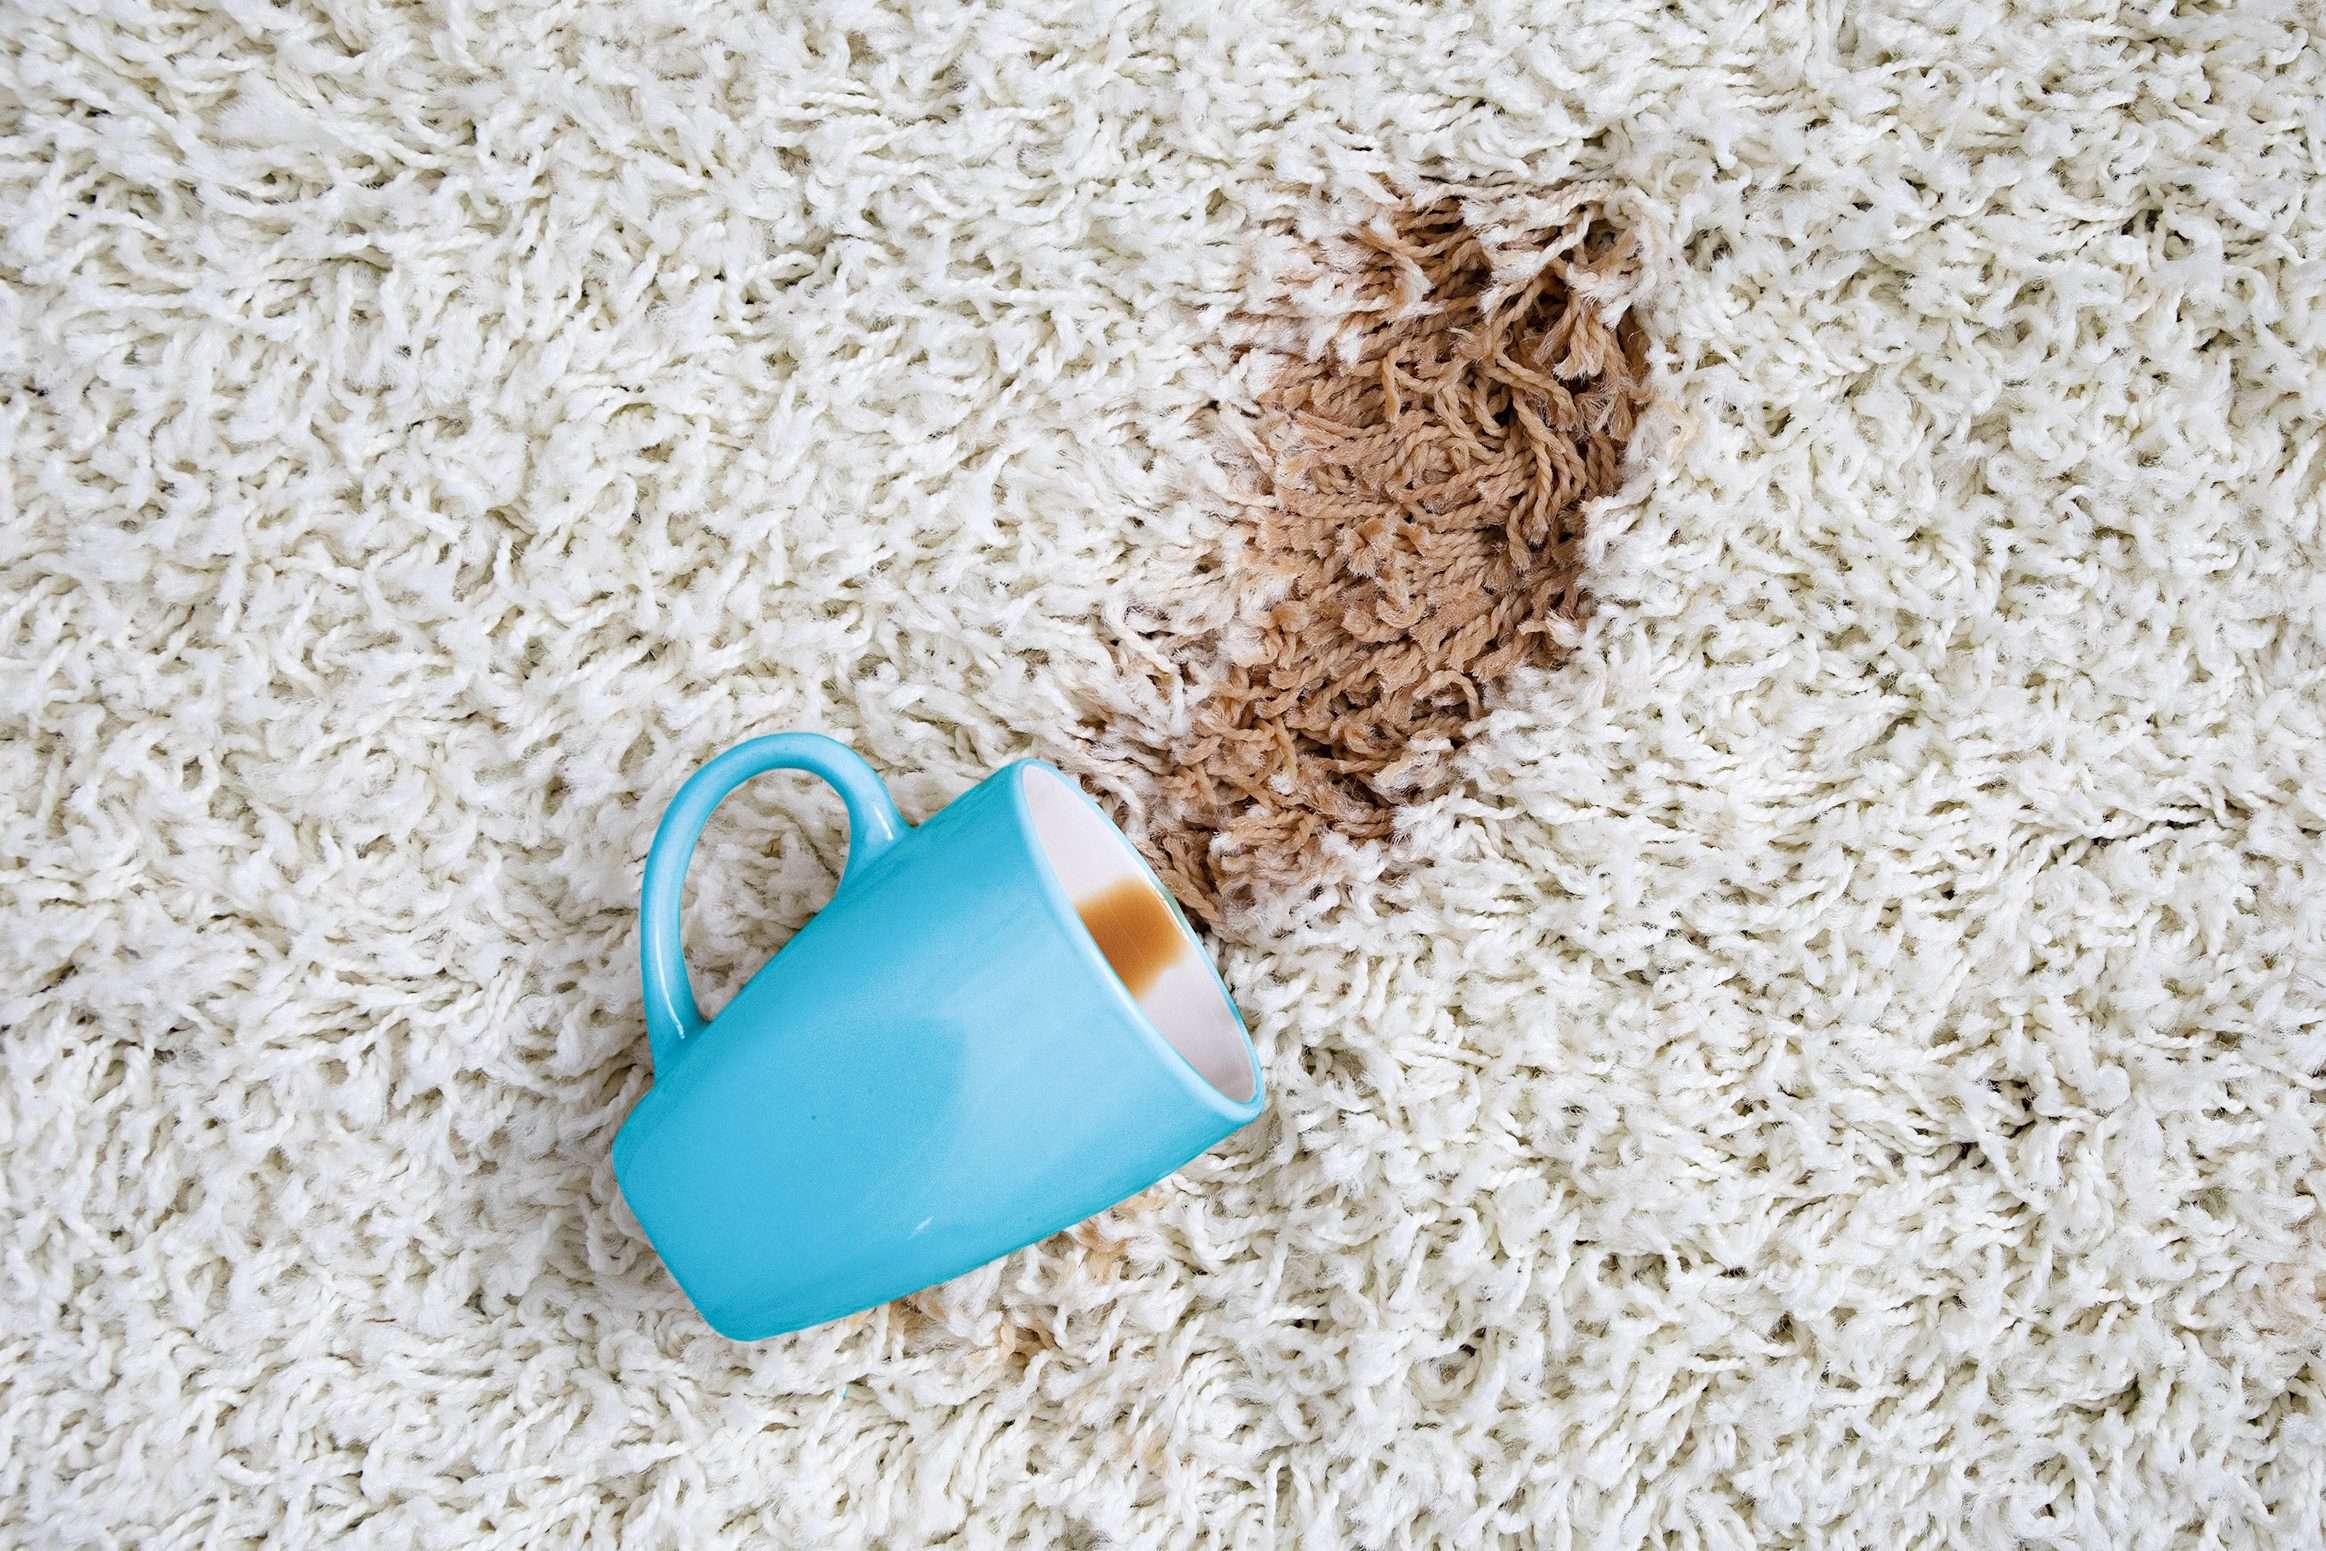 How to Get Coffee Stains Out of Carpet â Coffee Spill on ...